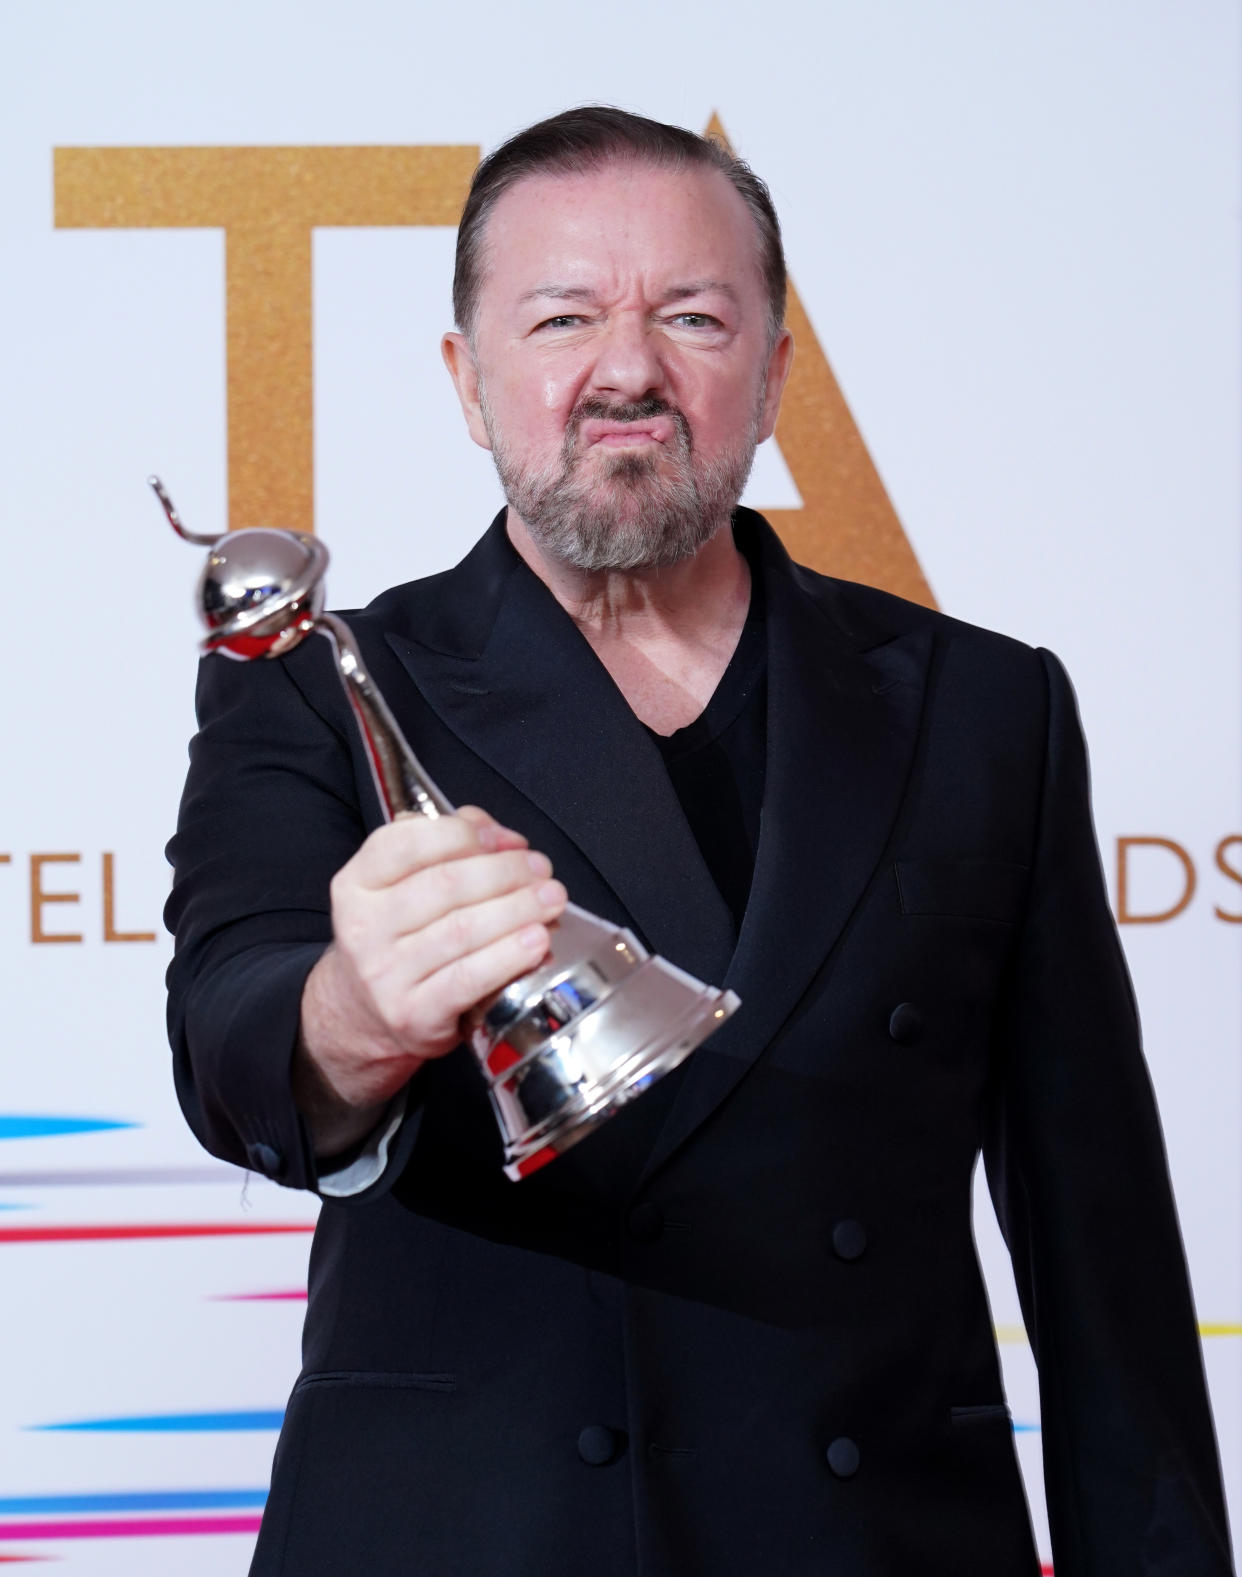 Ricky Gervais in the press room after winning the Comedy award for After Life at the National Television Awards 2021 held at the O2 Arena, London. Picture date: Thursday September 9, 2021. (Photo by Ian West/PA Images via Getty Images)